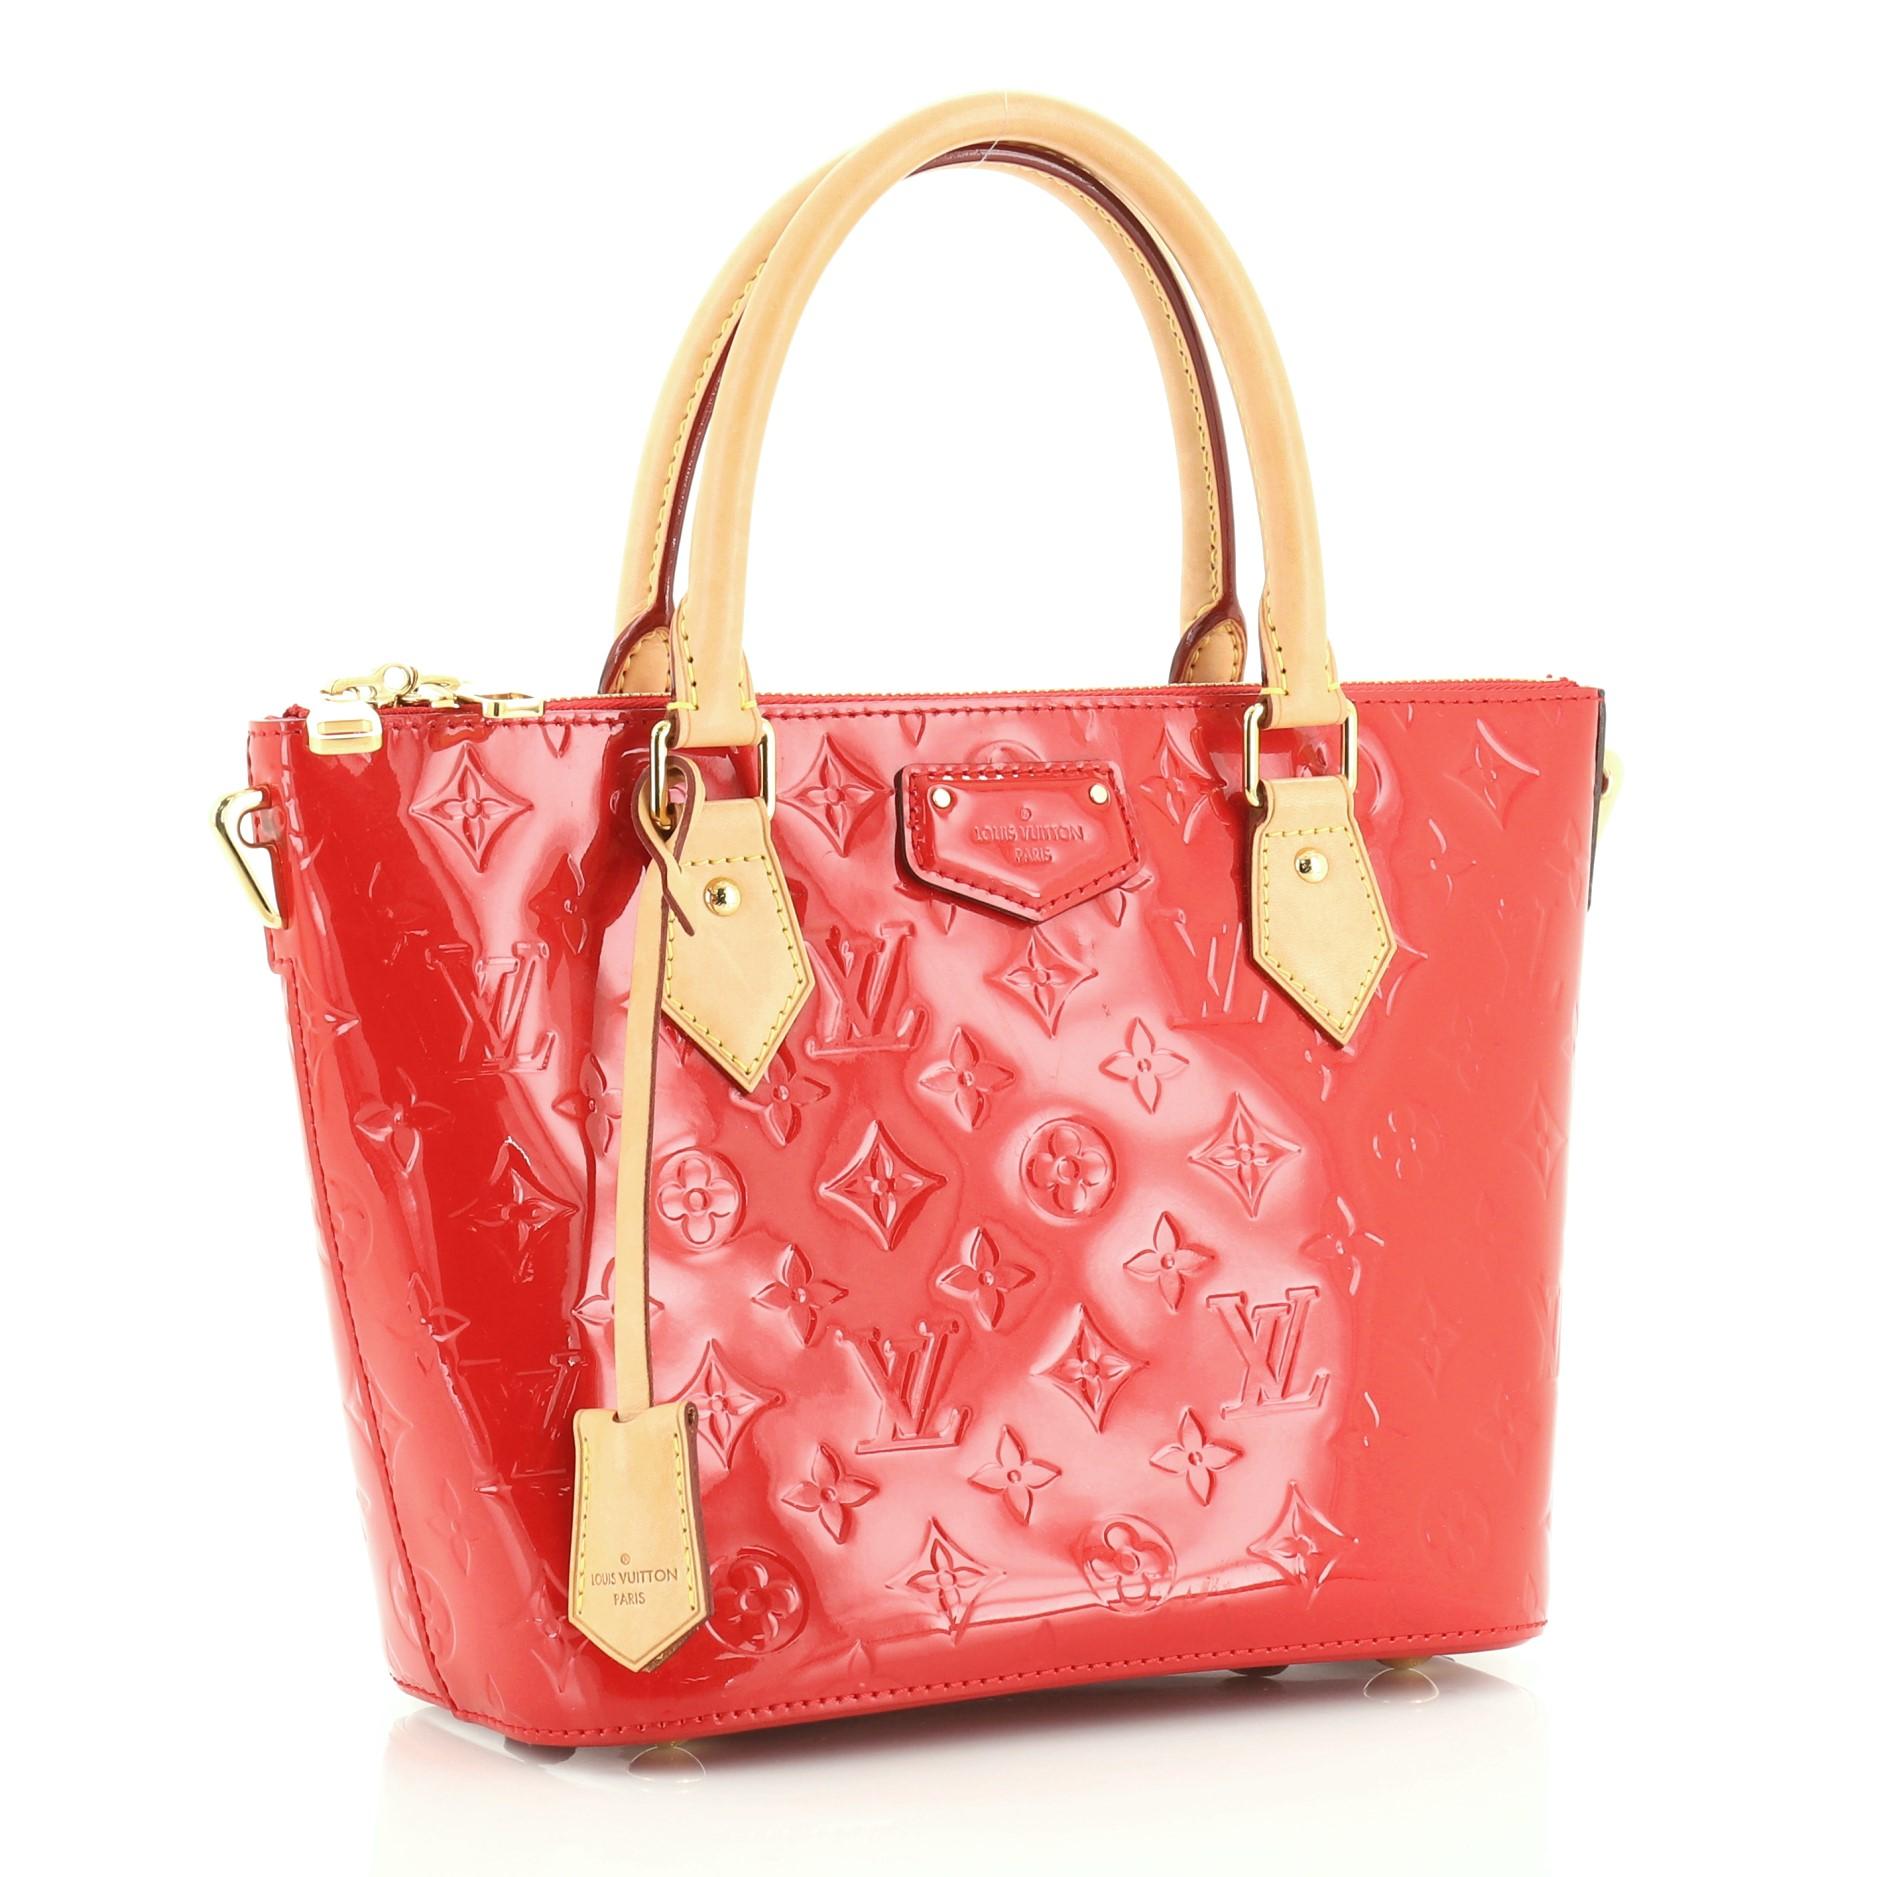 This Louis Vuitton Montebello Handbag Monogram Vernis PM, crafted in red monogram vernis leather, features dual rolled vachetta handles, protective base studs, and gold-tone hardware. Its zip closure opens to a red fabric interior with slip pocket.